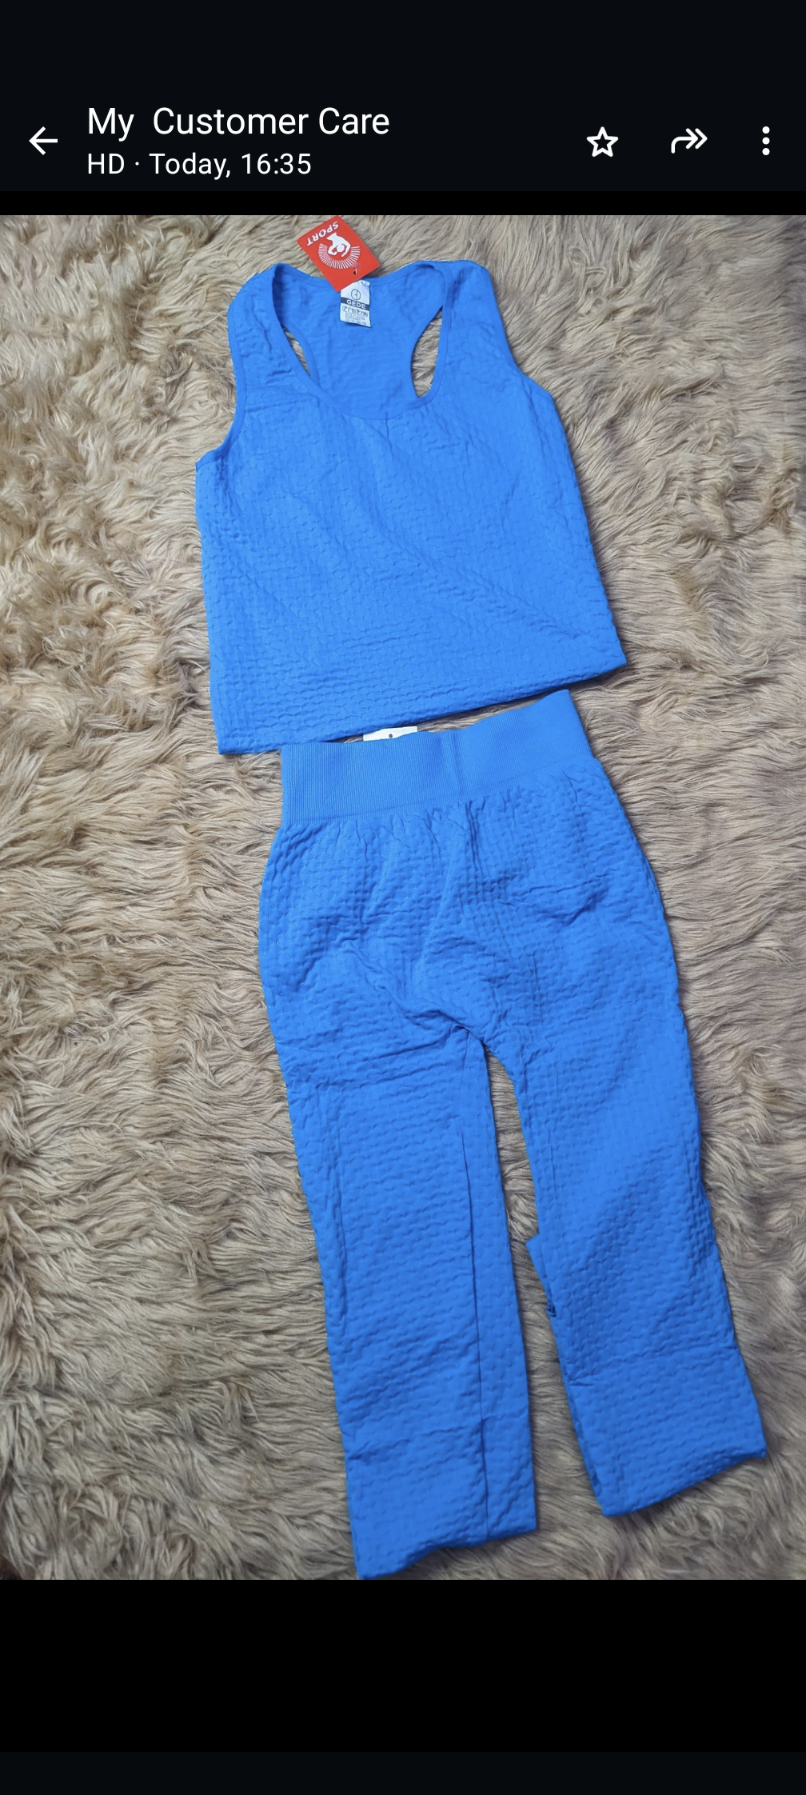 Blue Spandex Top High-Waist pants (one size fit all)